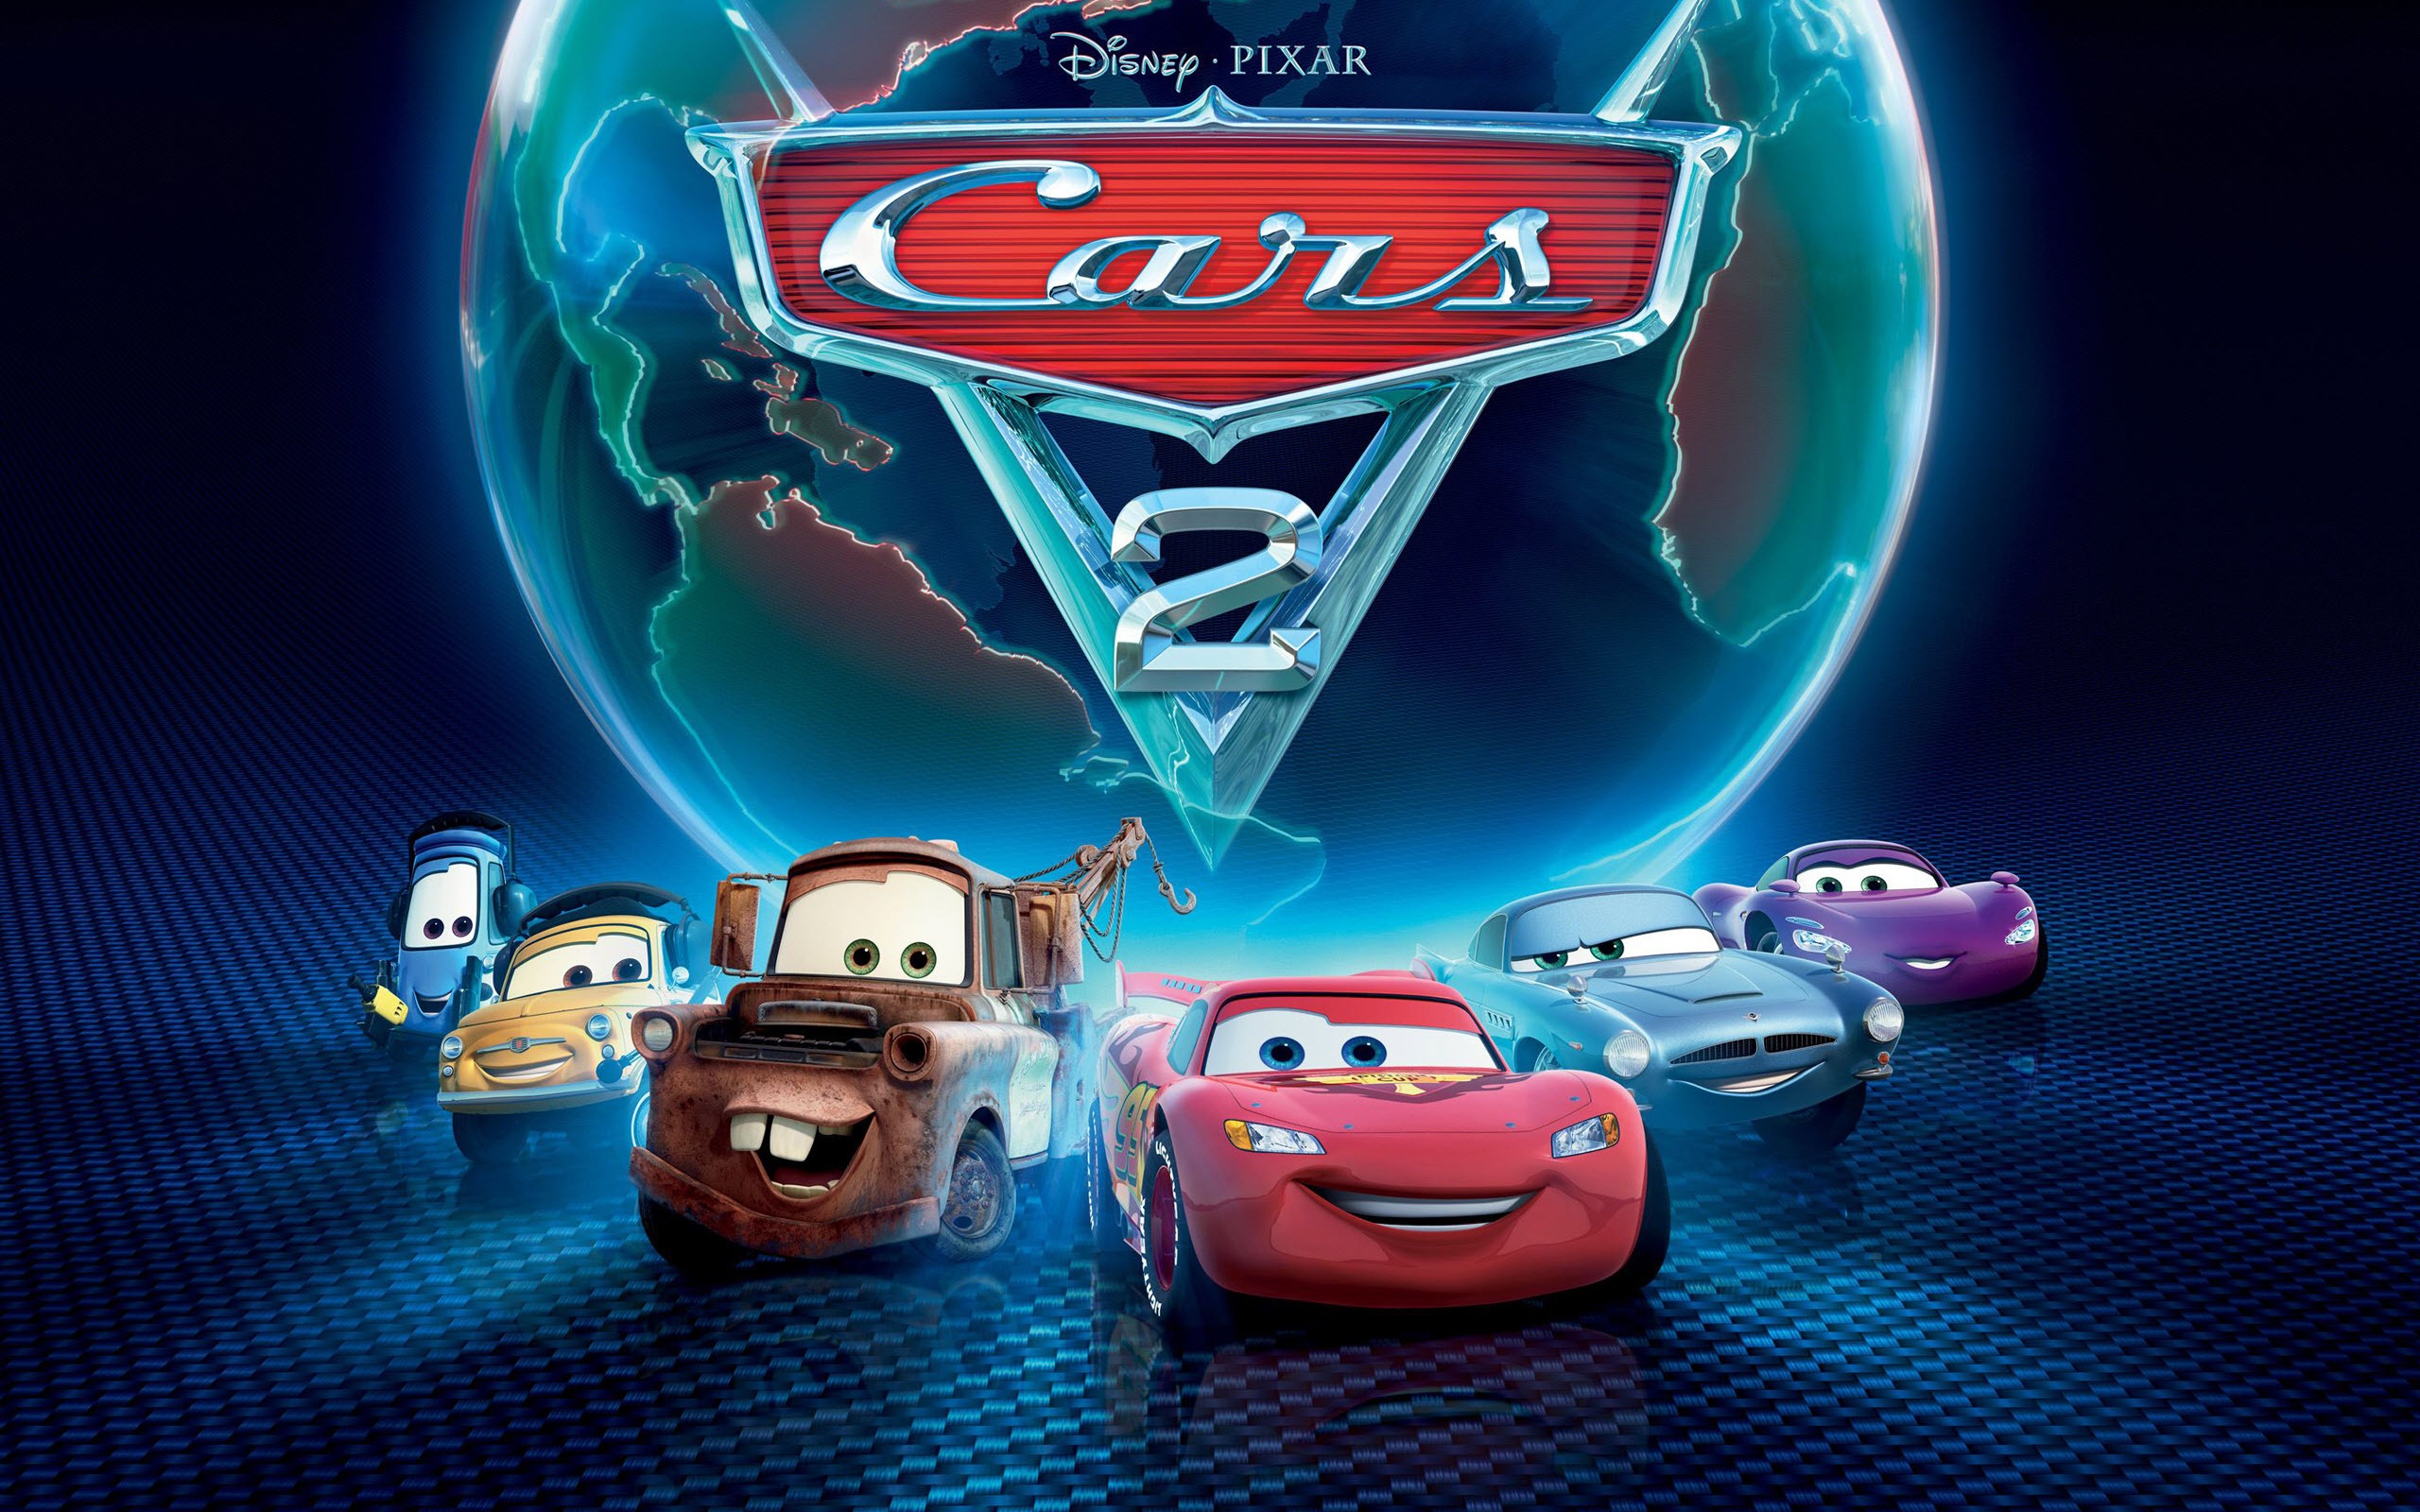 Movie poster for Cars 2 with vibrant colors and characters in action, providing a dynamic and exciting feel.